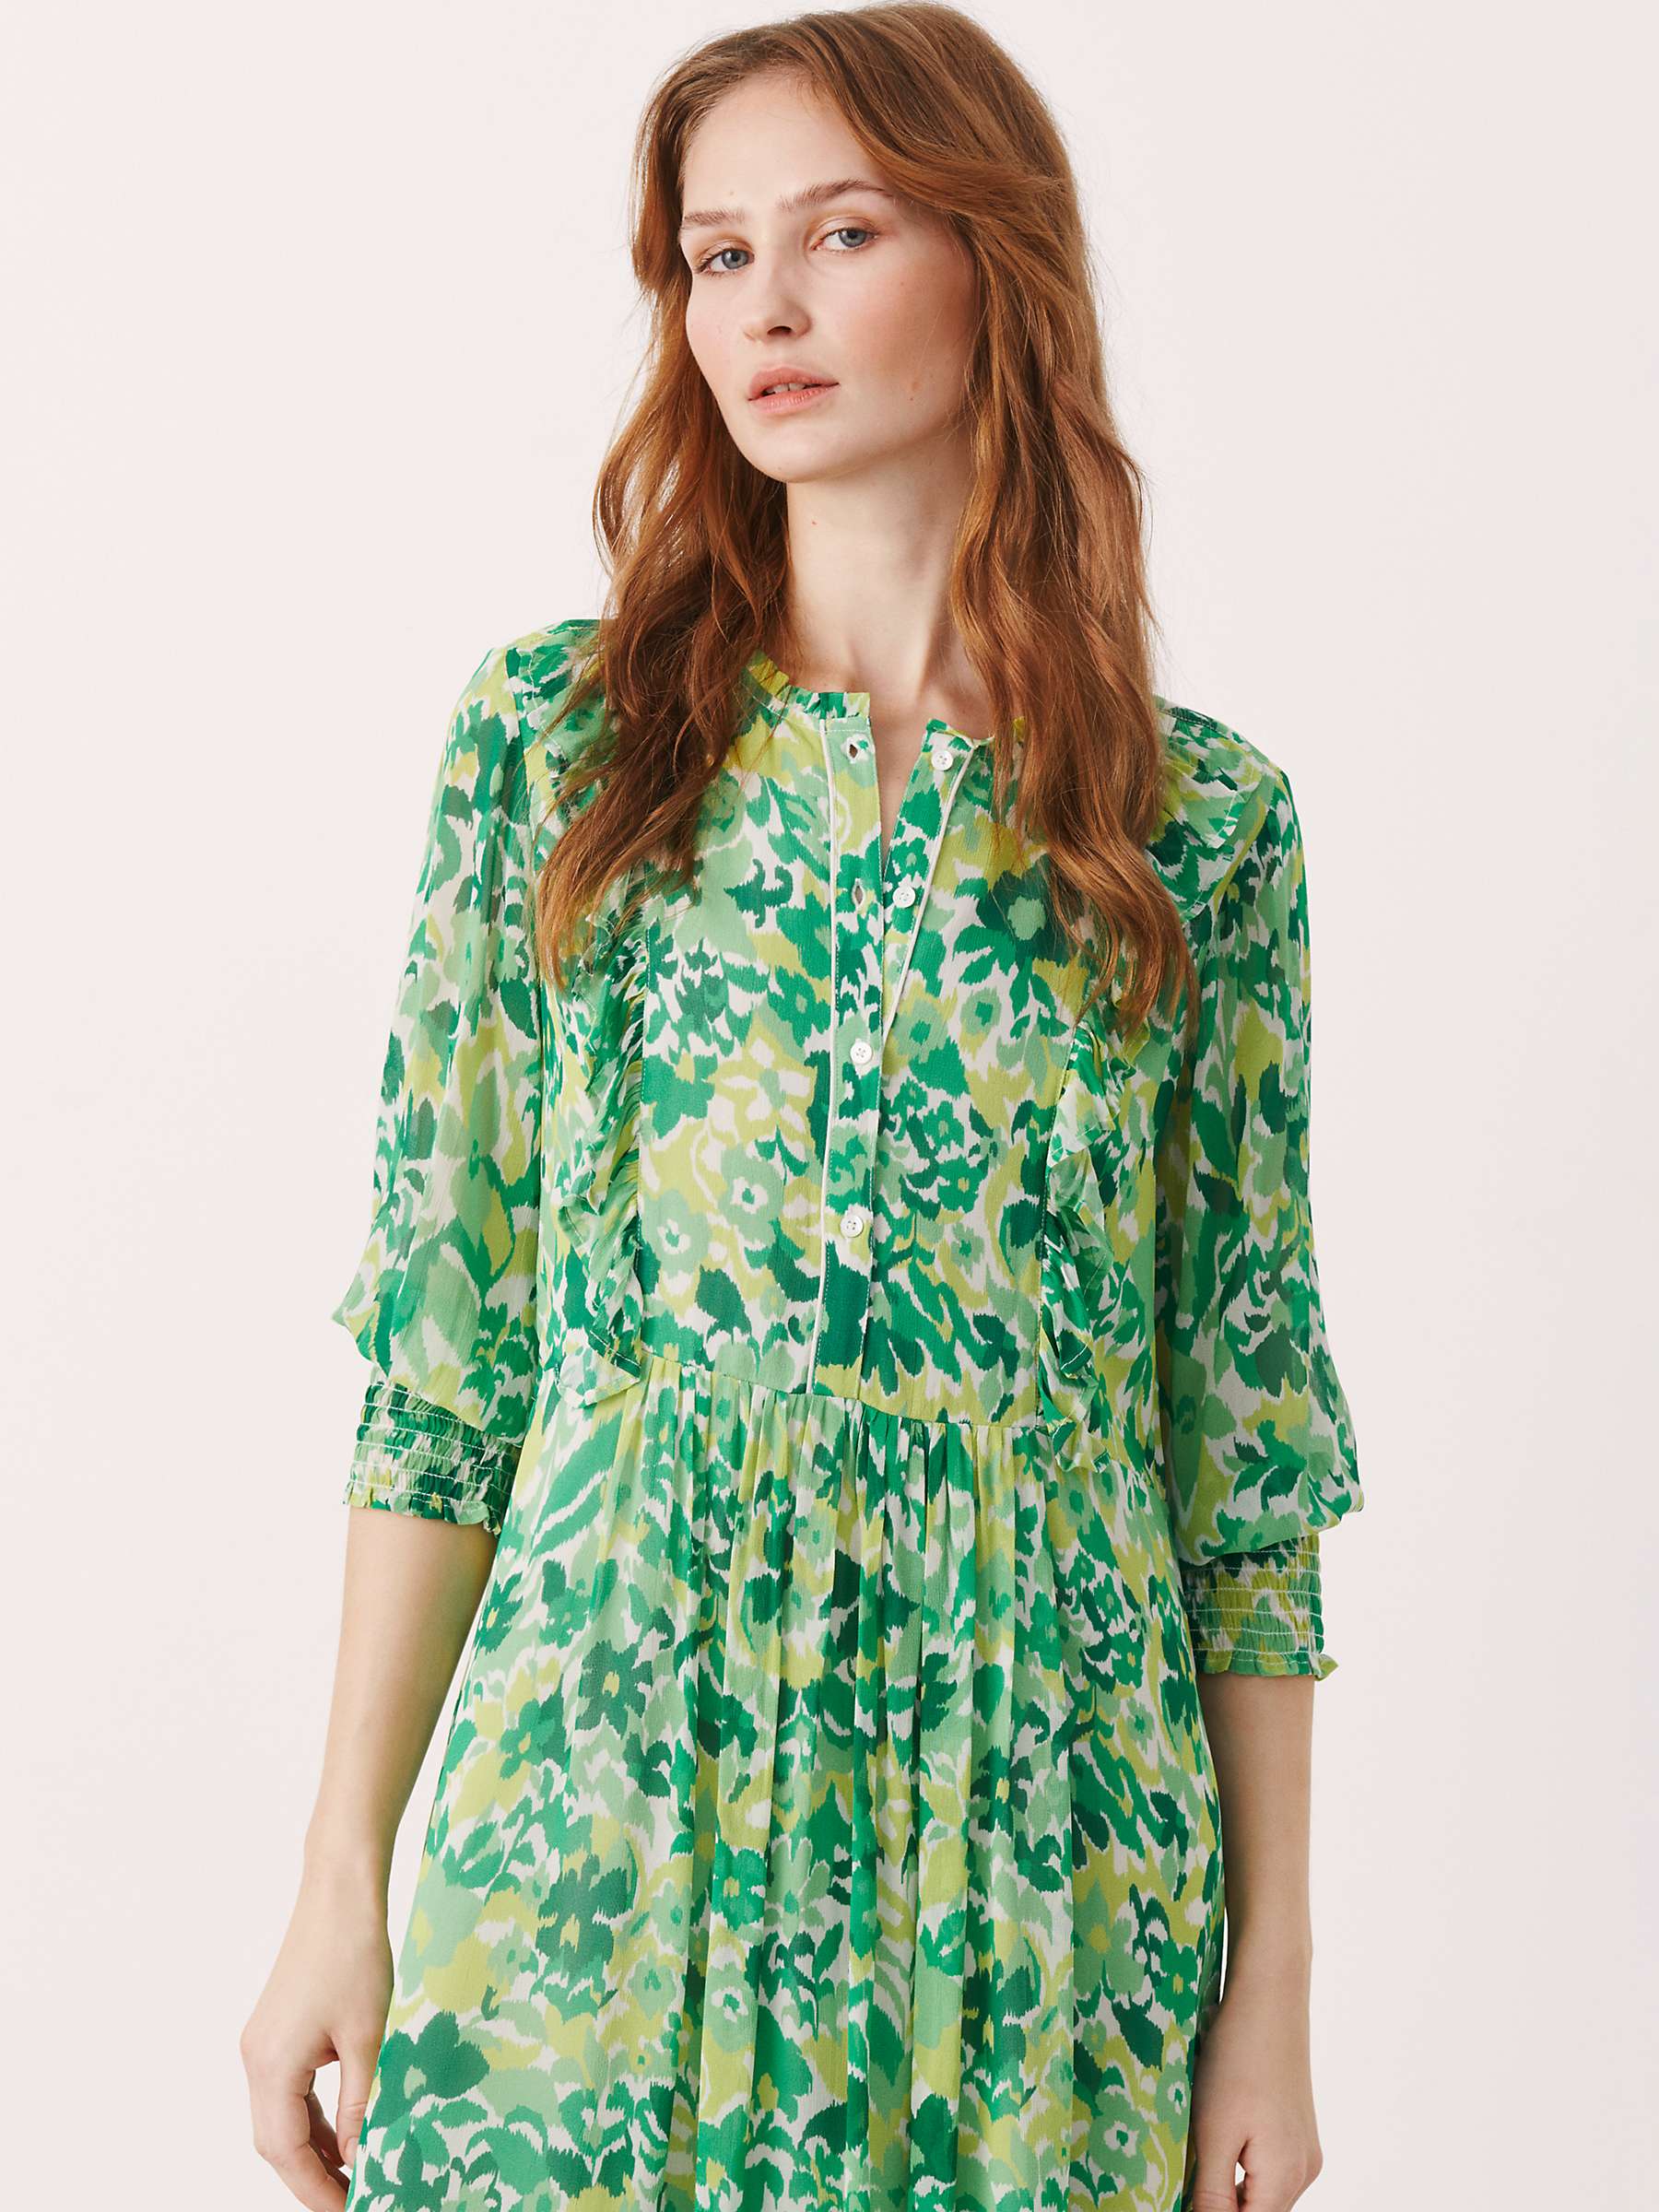 Buy Part Two Sila Floral Long Sleeve Maxi Dress Online at johnlewis.com